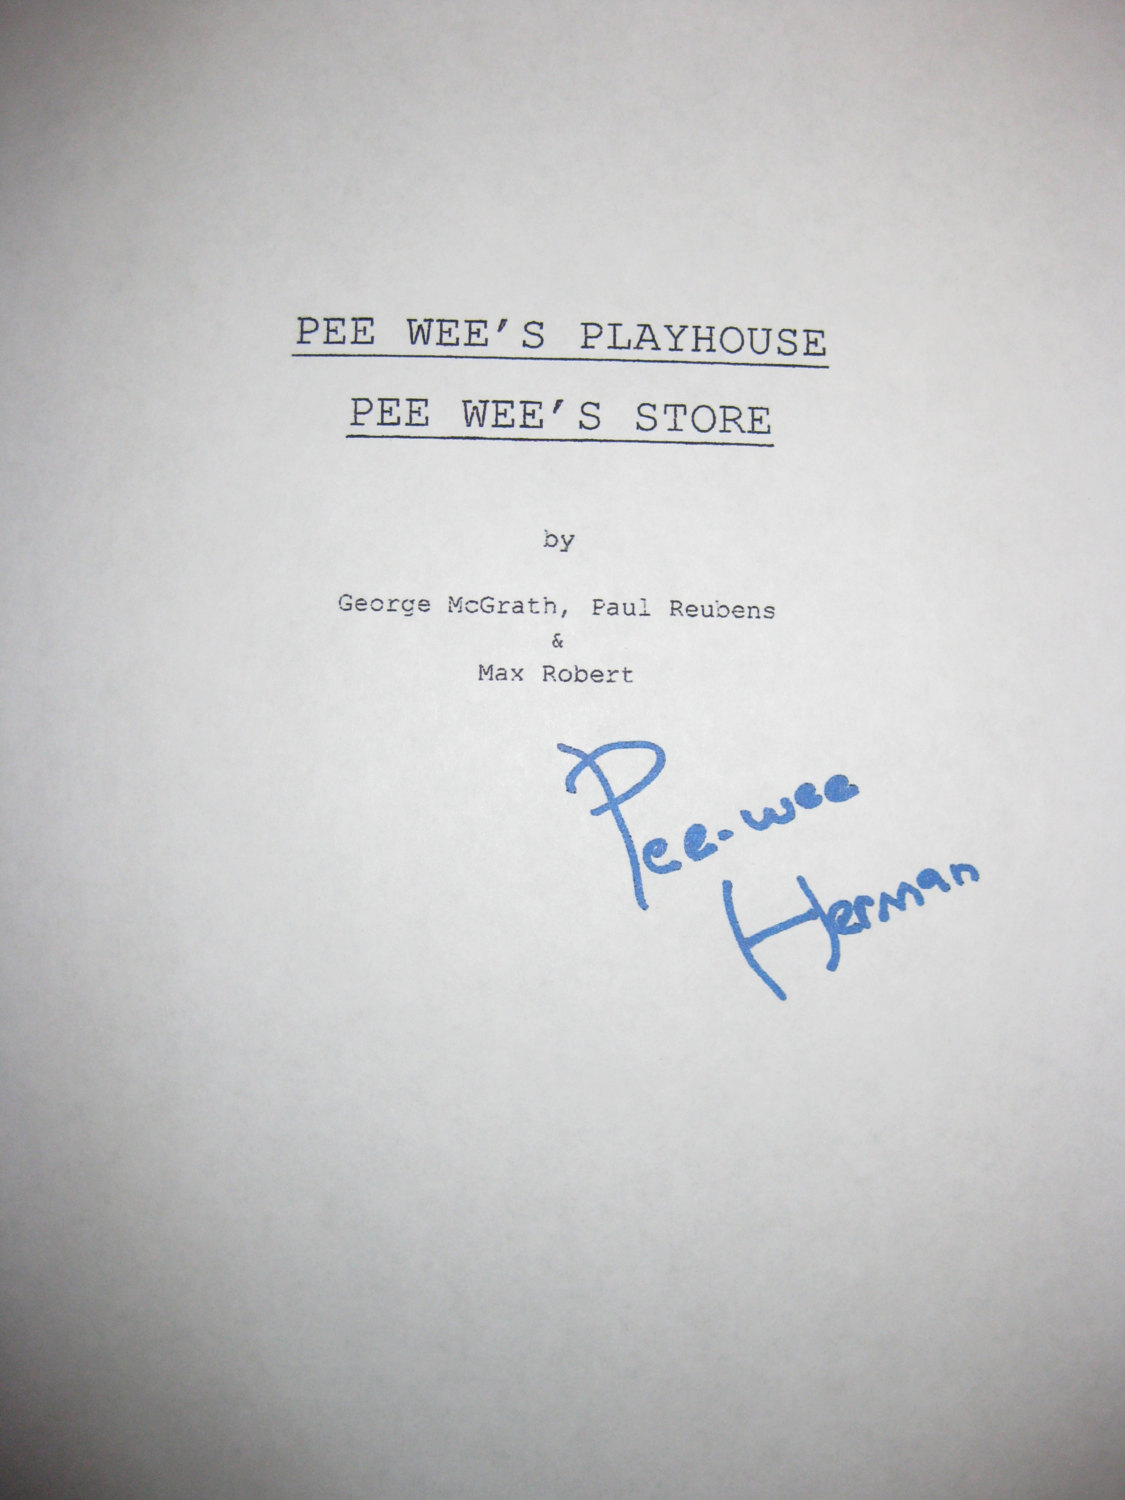 Primary image for Pee Wee's Playhouse Signed TV Script Paul Reubens Pee Wee's Store autograph scre